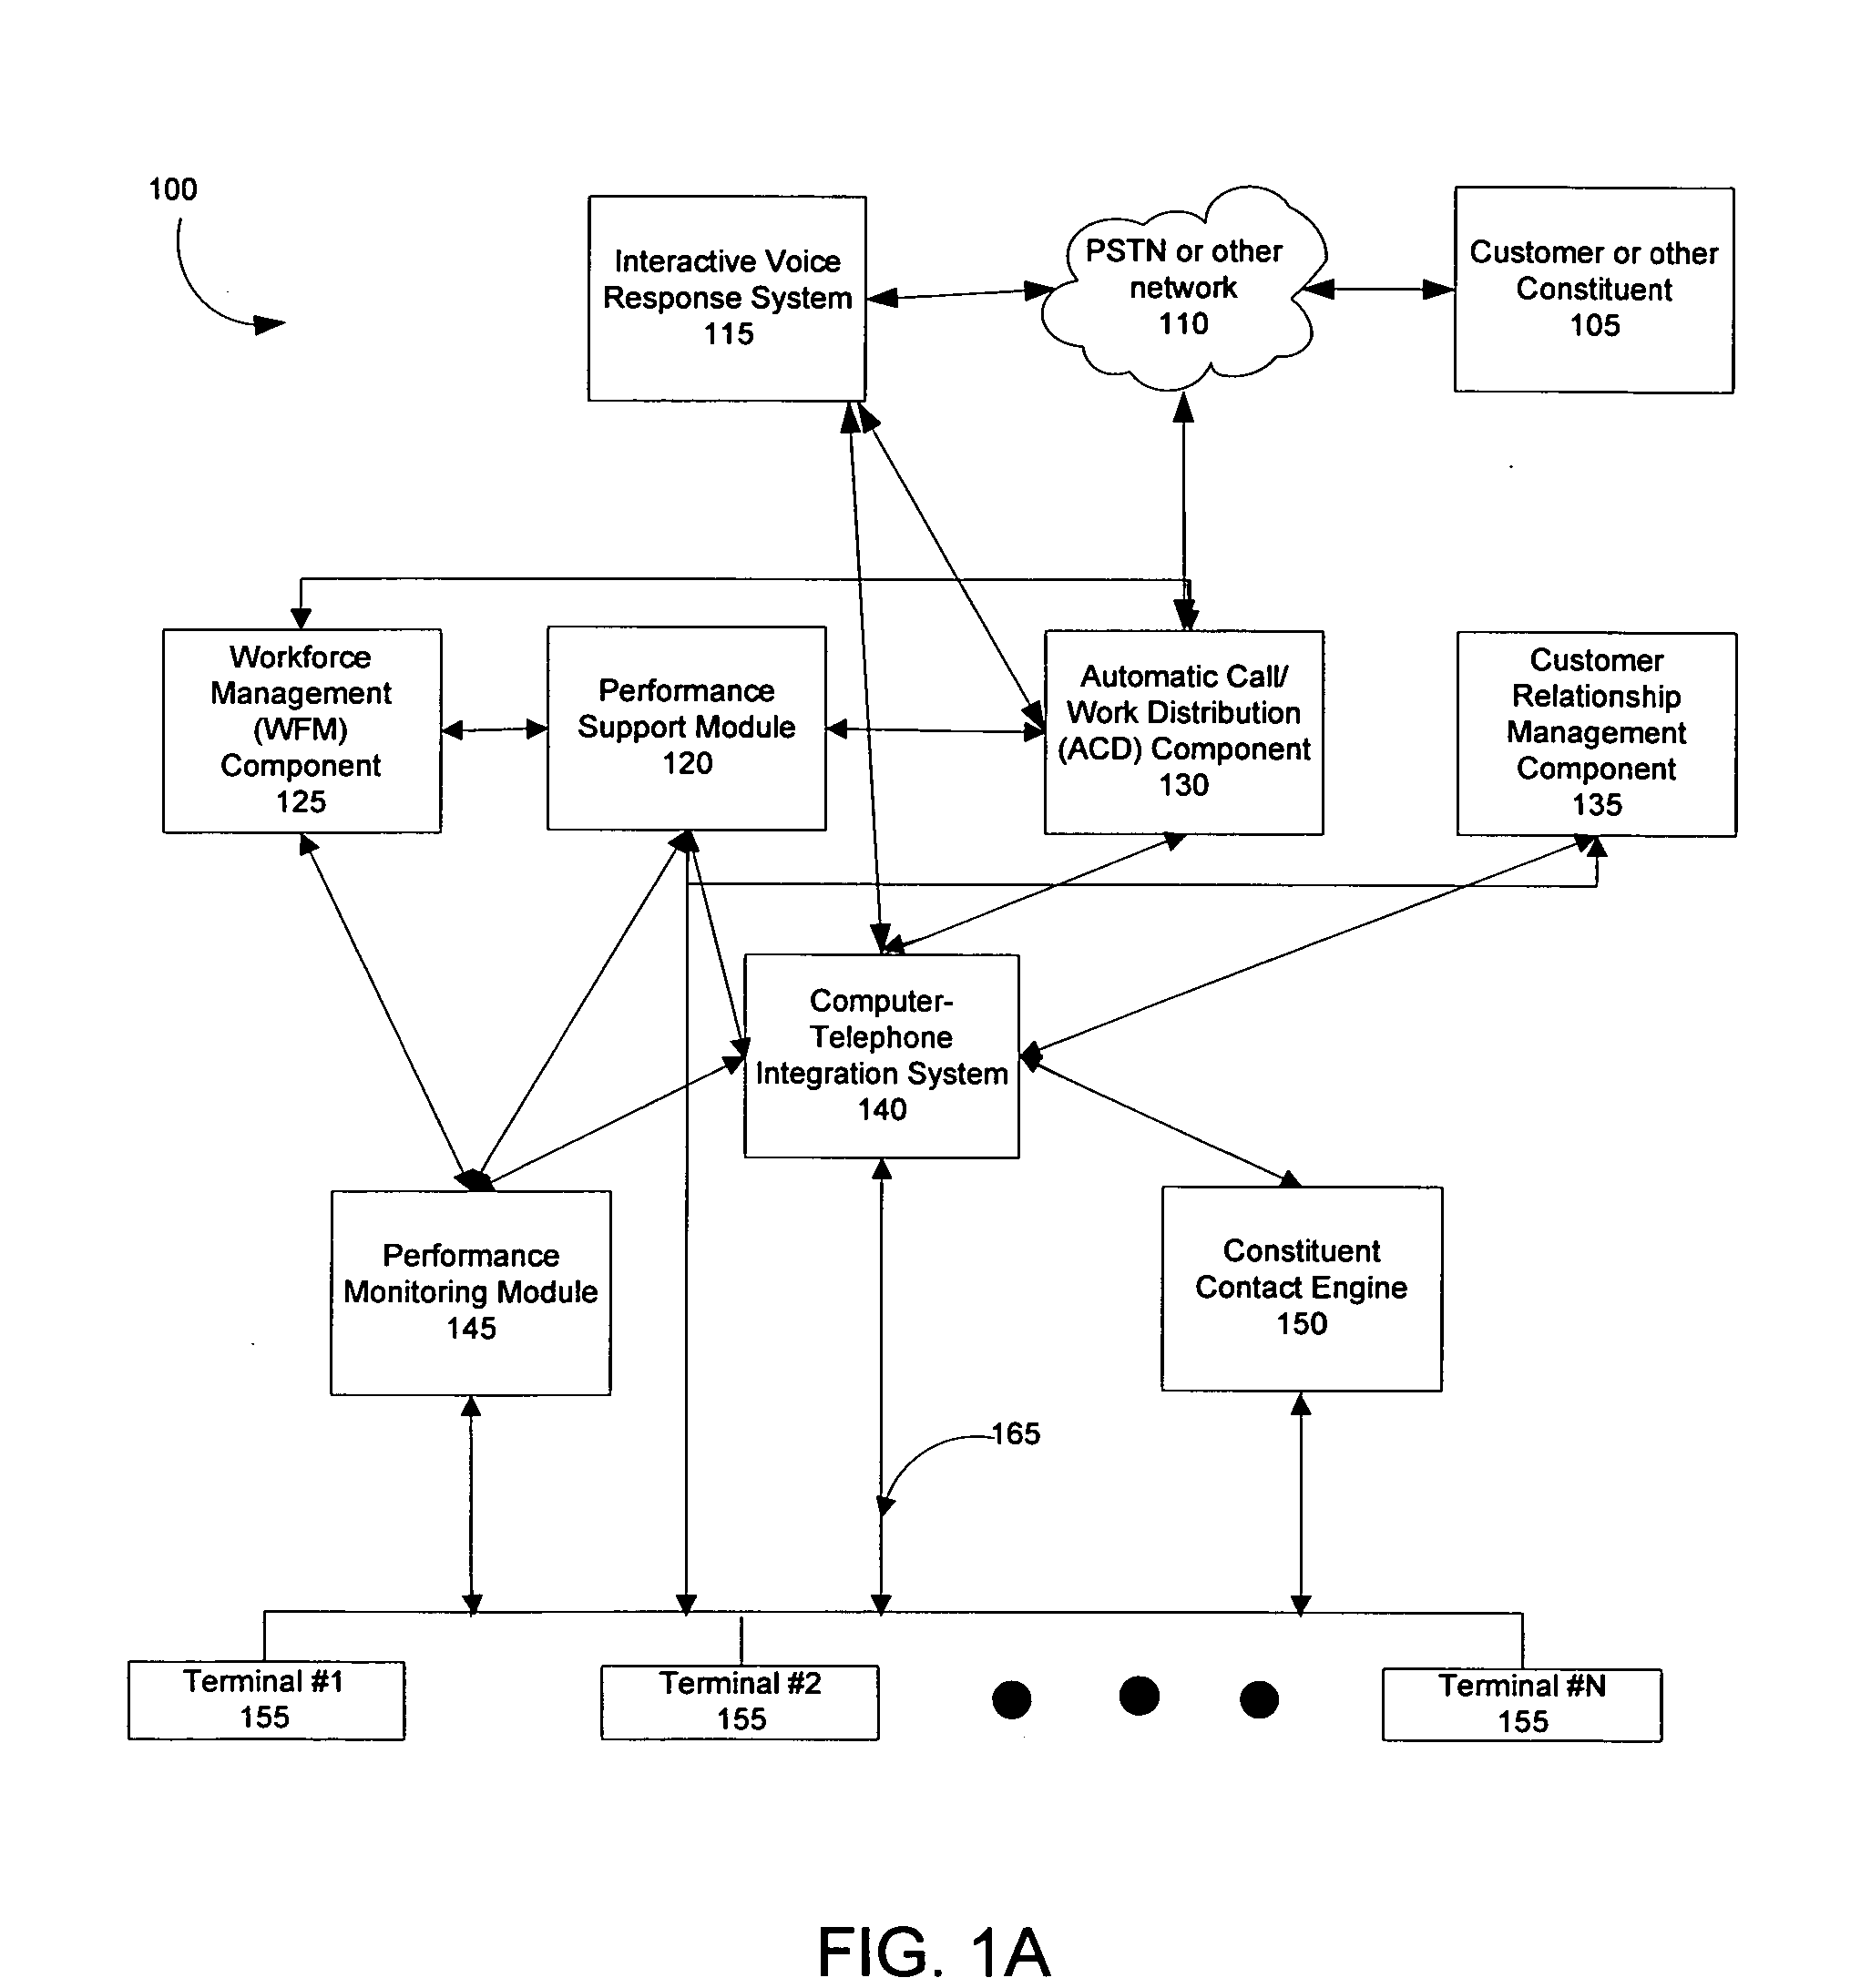 Method and system for assessing and deploying personnel for roles in a contact center